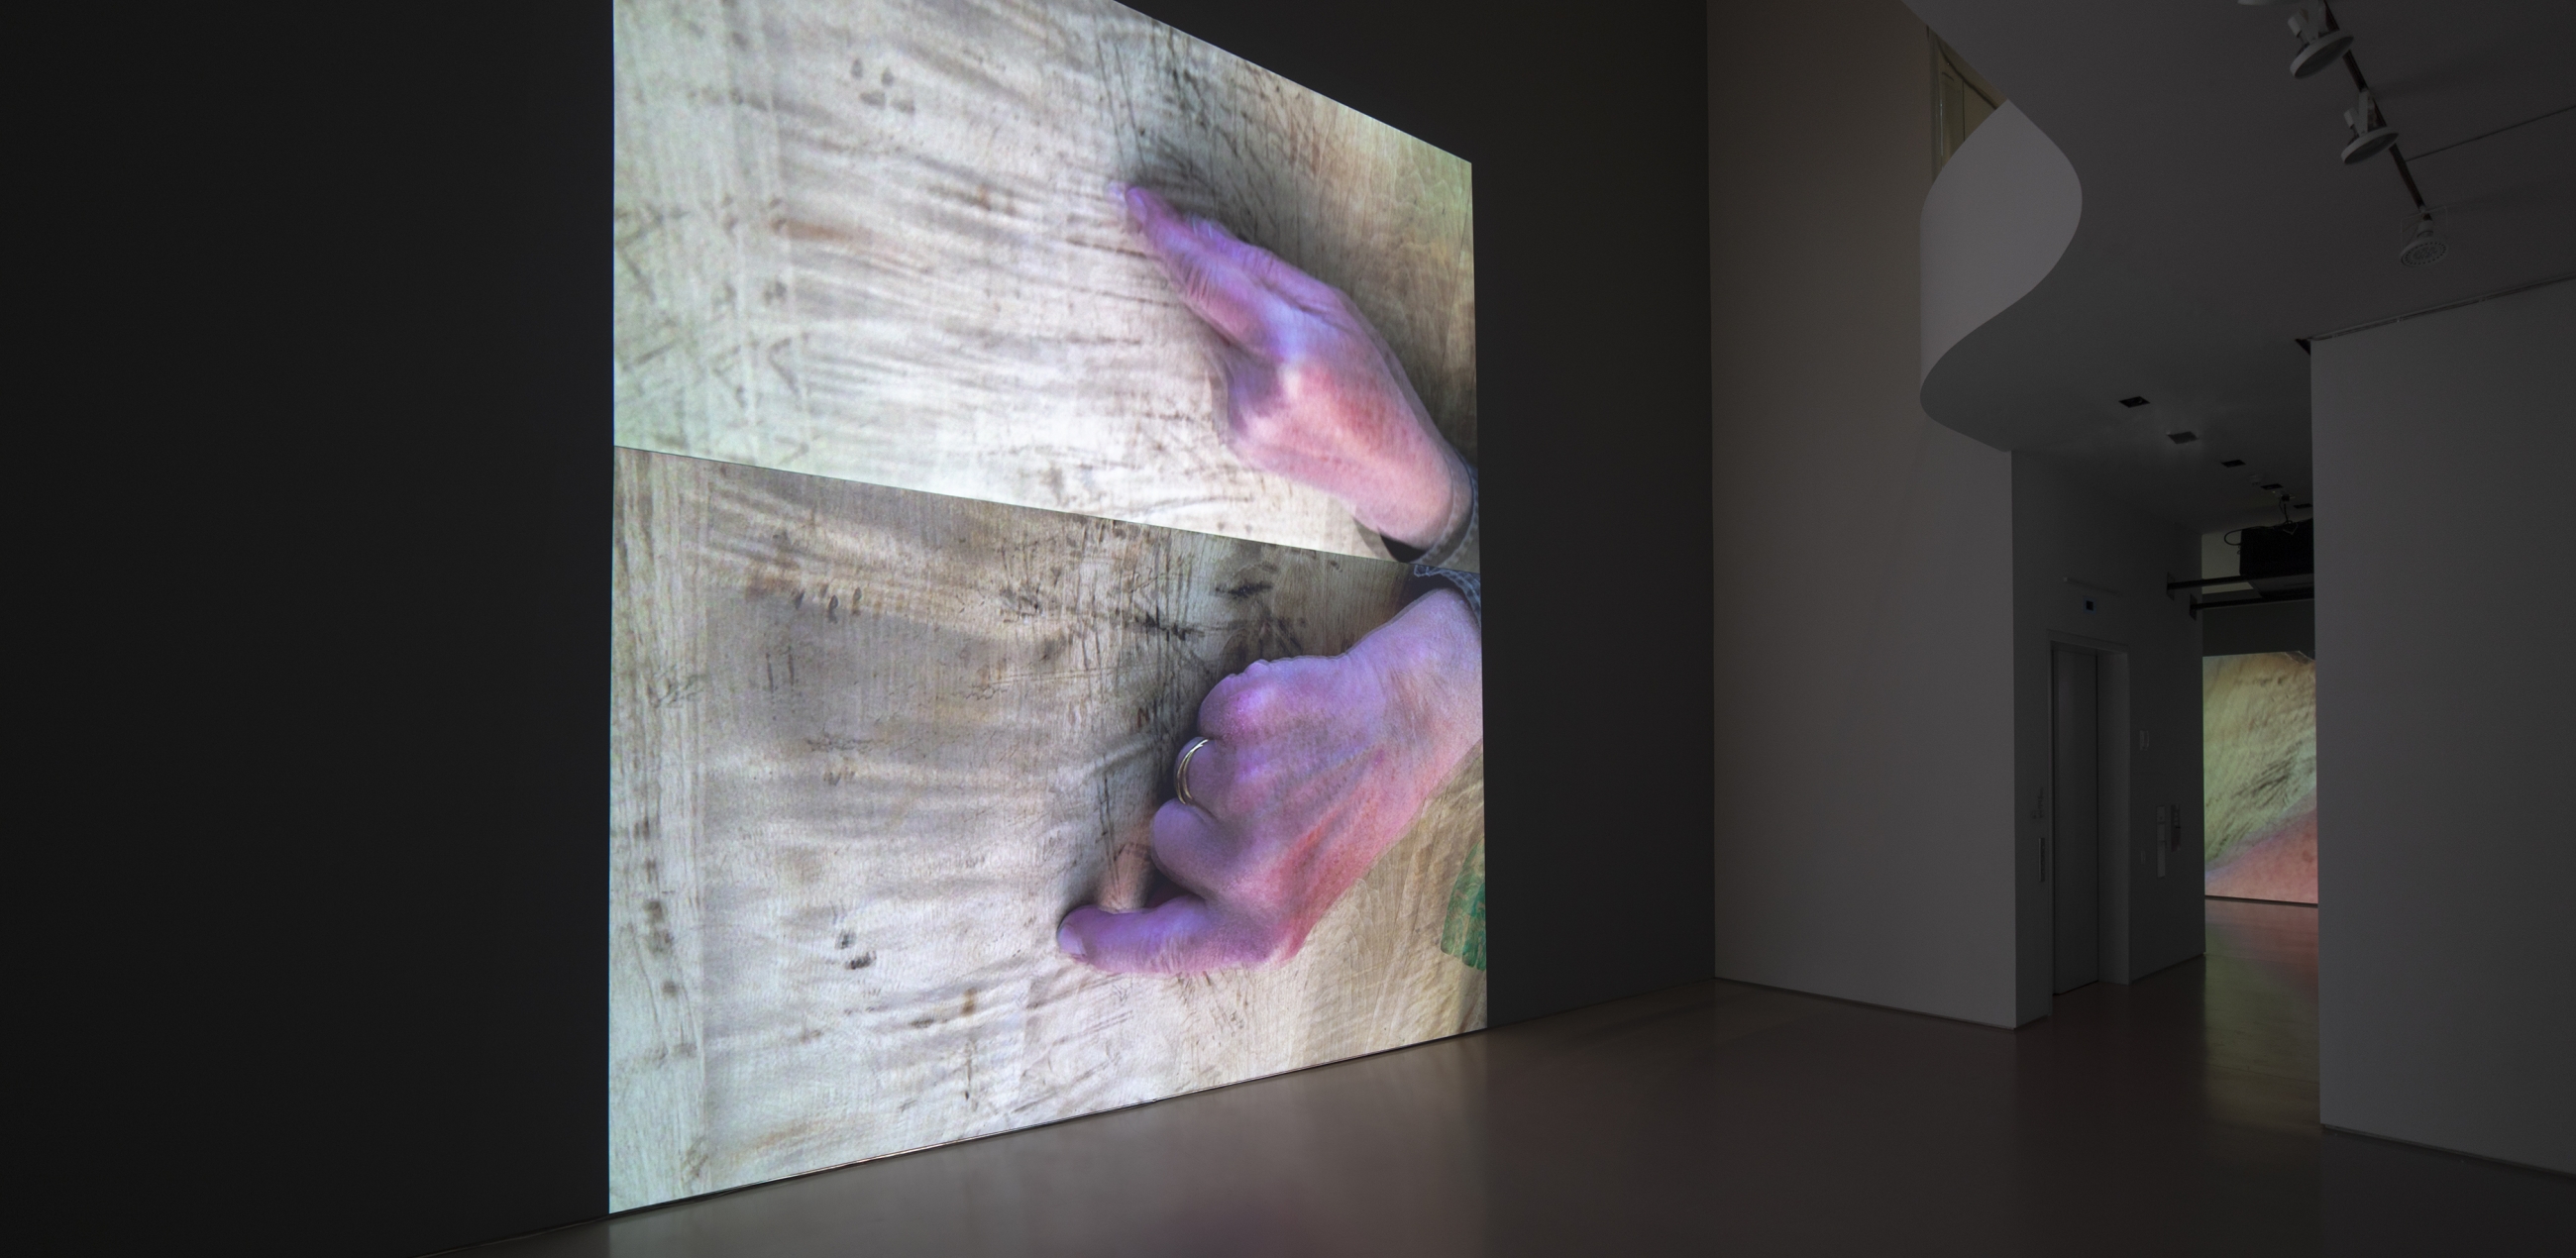 installation view of two video projections on gallery wall depicting the artist's hands on a wooden table